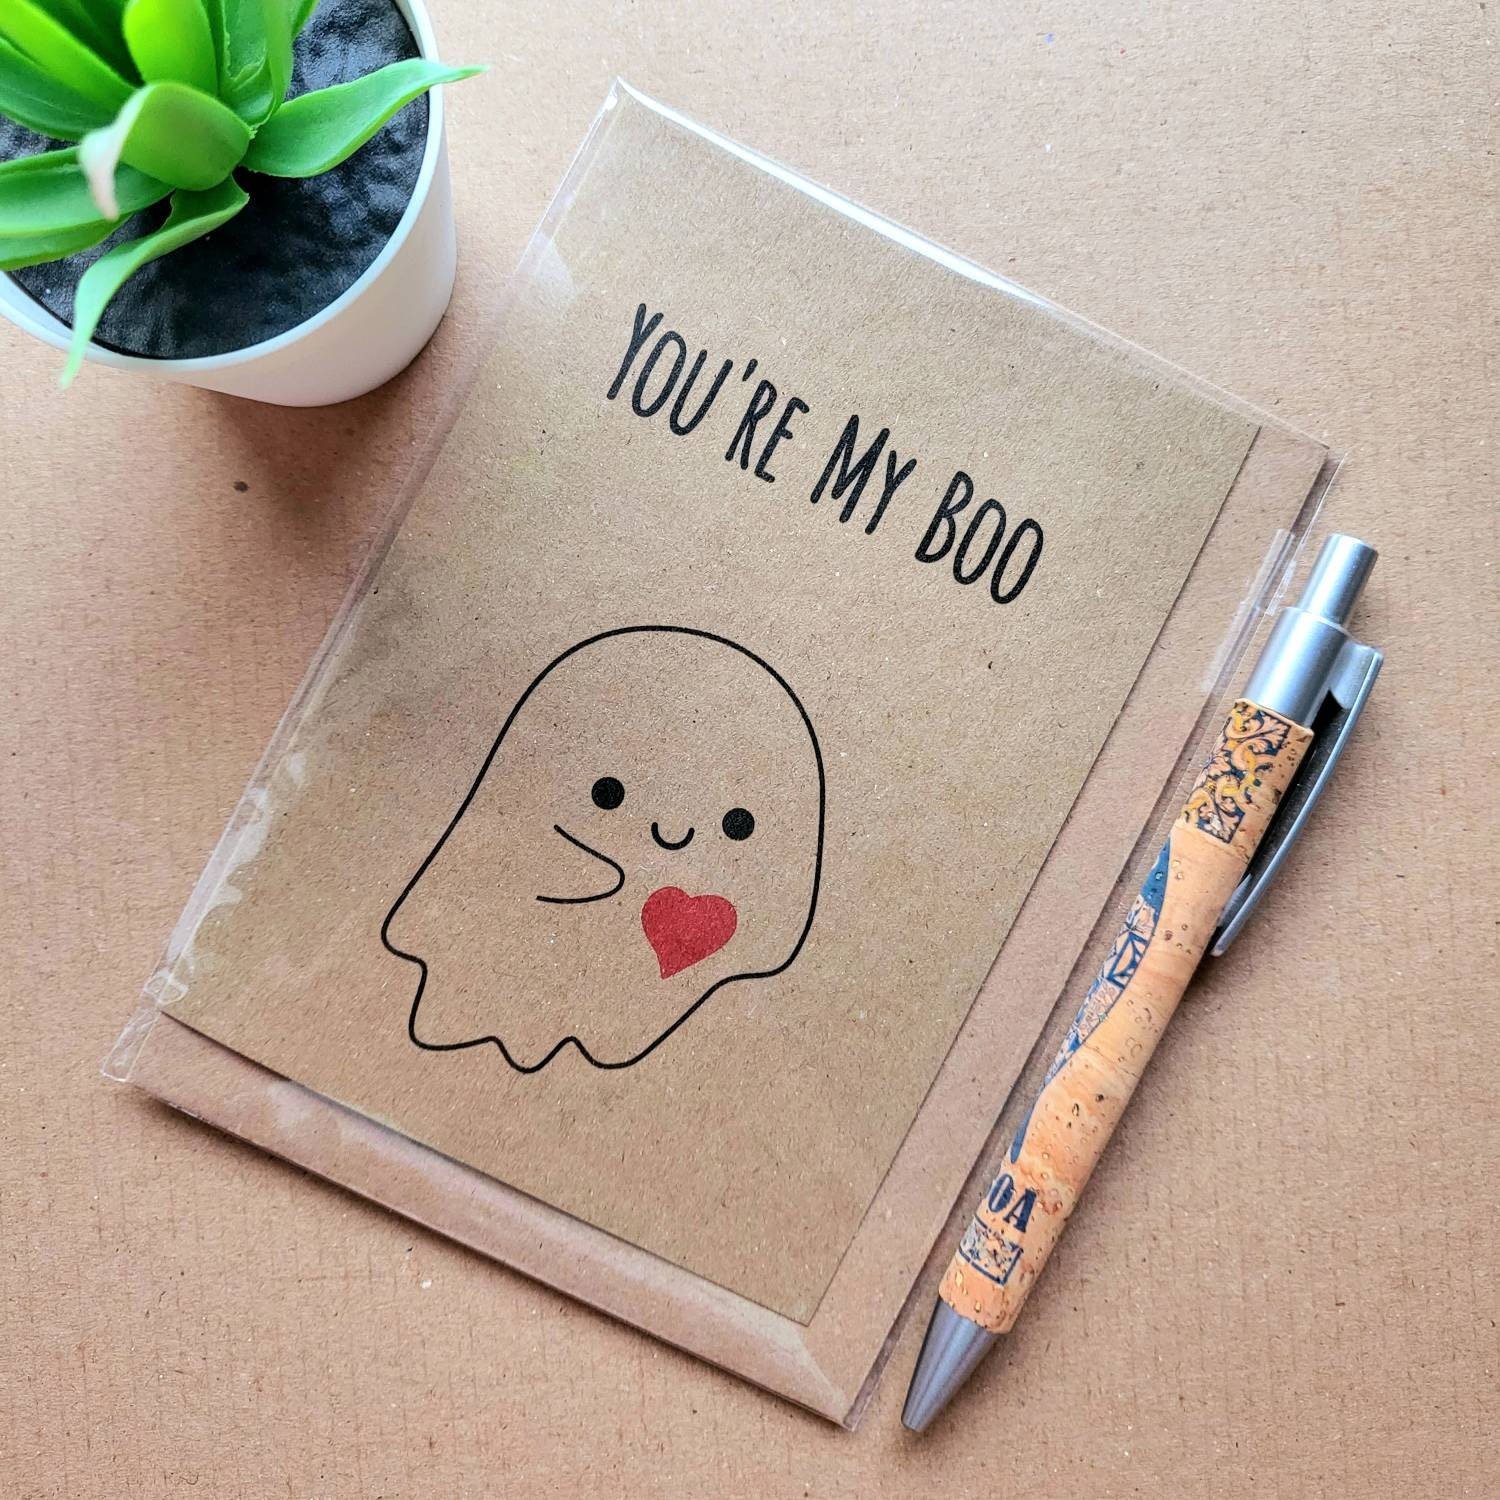 Cute Ghost valentines card - You're my Boo